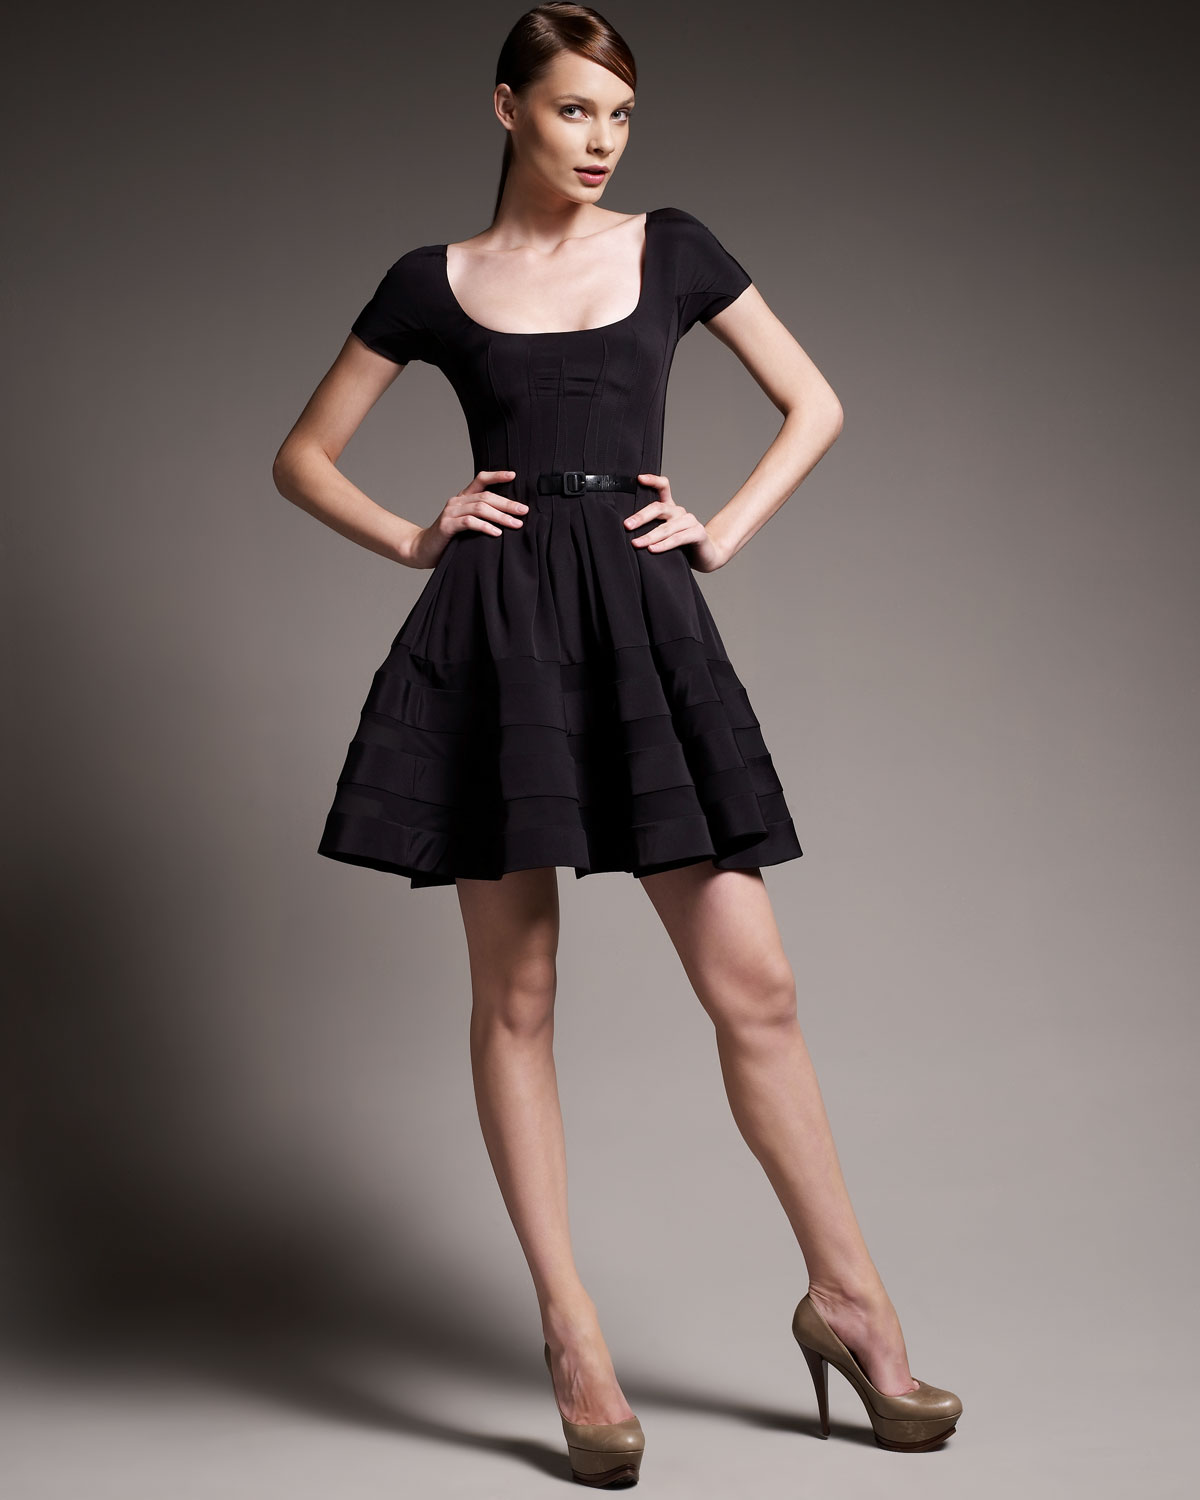 Lyst - Zac Posen Tulle and Lace Dress in Black